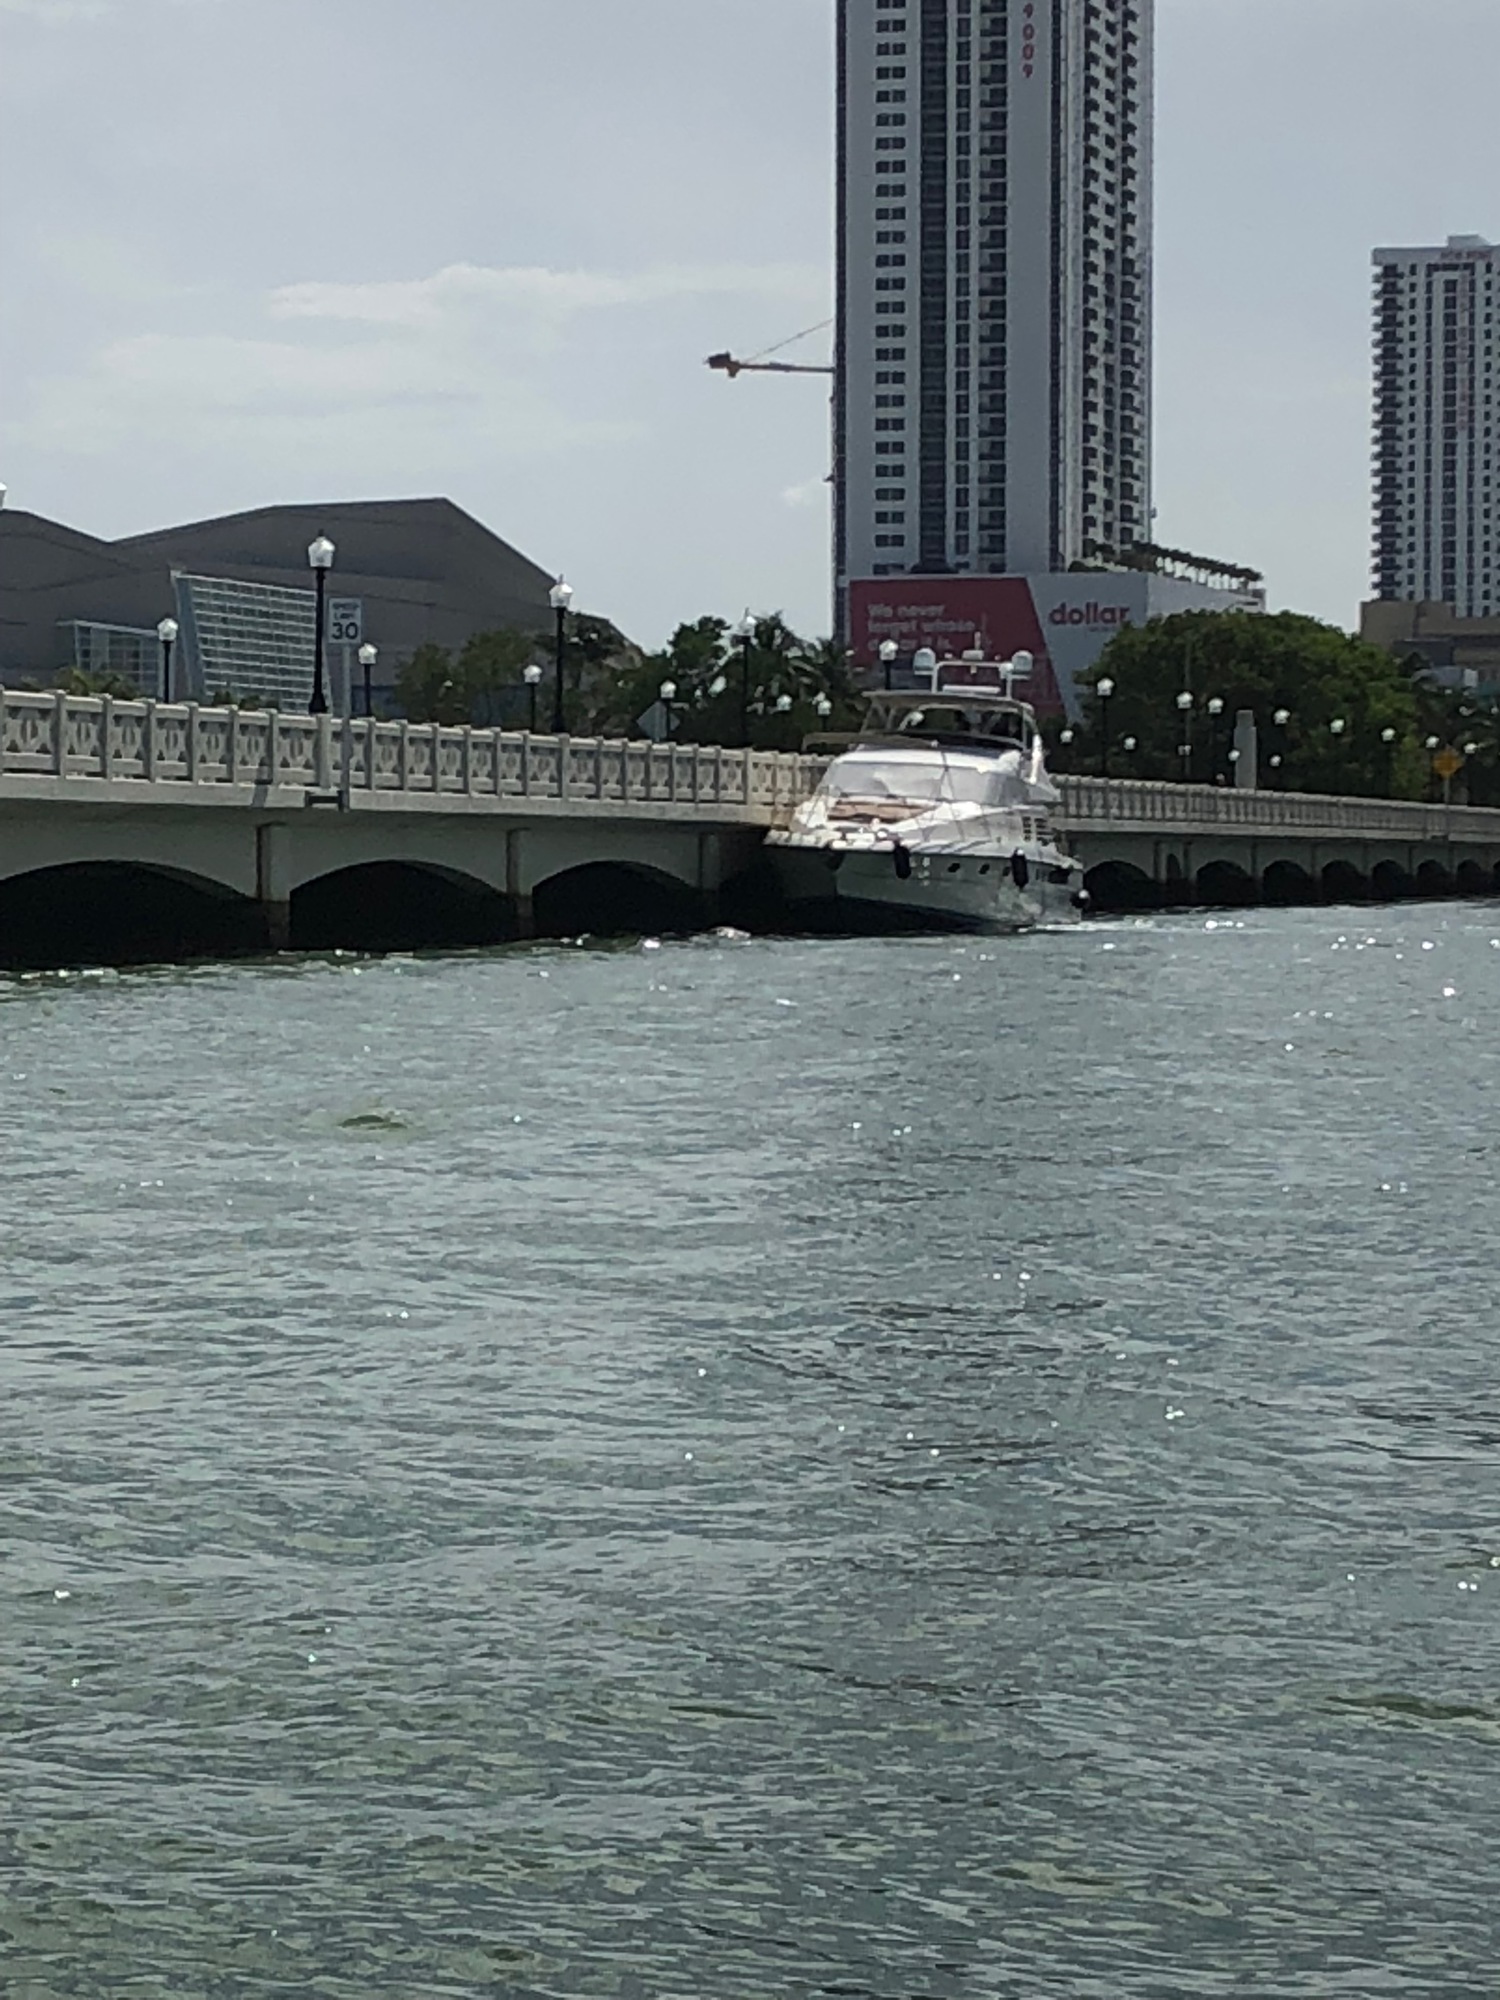 Coast Guard terminates yacht voyage for multiple violations, including illegal charter operations, after bridge allision